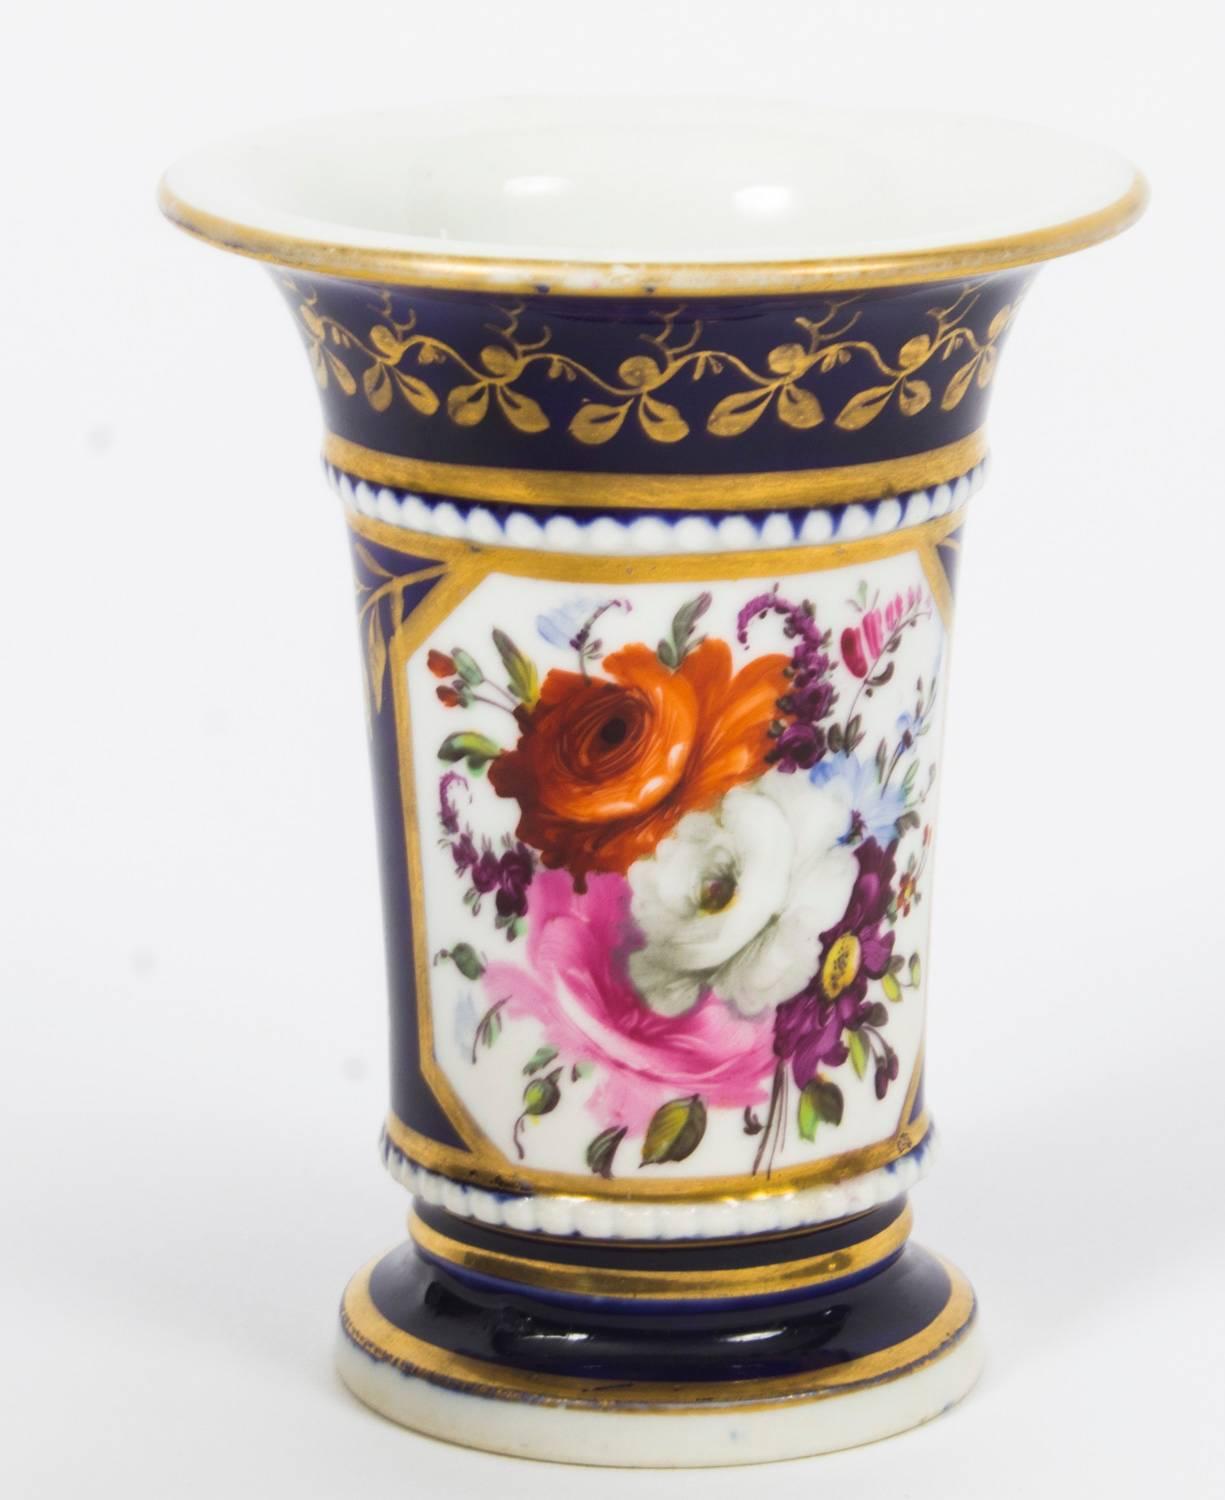 This is a truly superb pair of hand painted Regency English porcelain spill vases, Circa 1820 in date.

Beautifully hand painted with oval shaped panels of flowers on a Royal Blue ground with exquisite gilded decoration.

Instill the refined